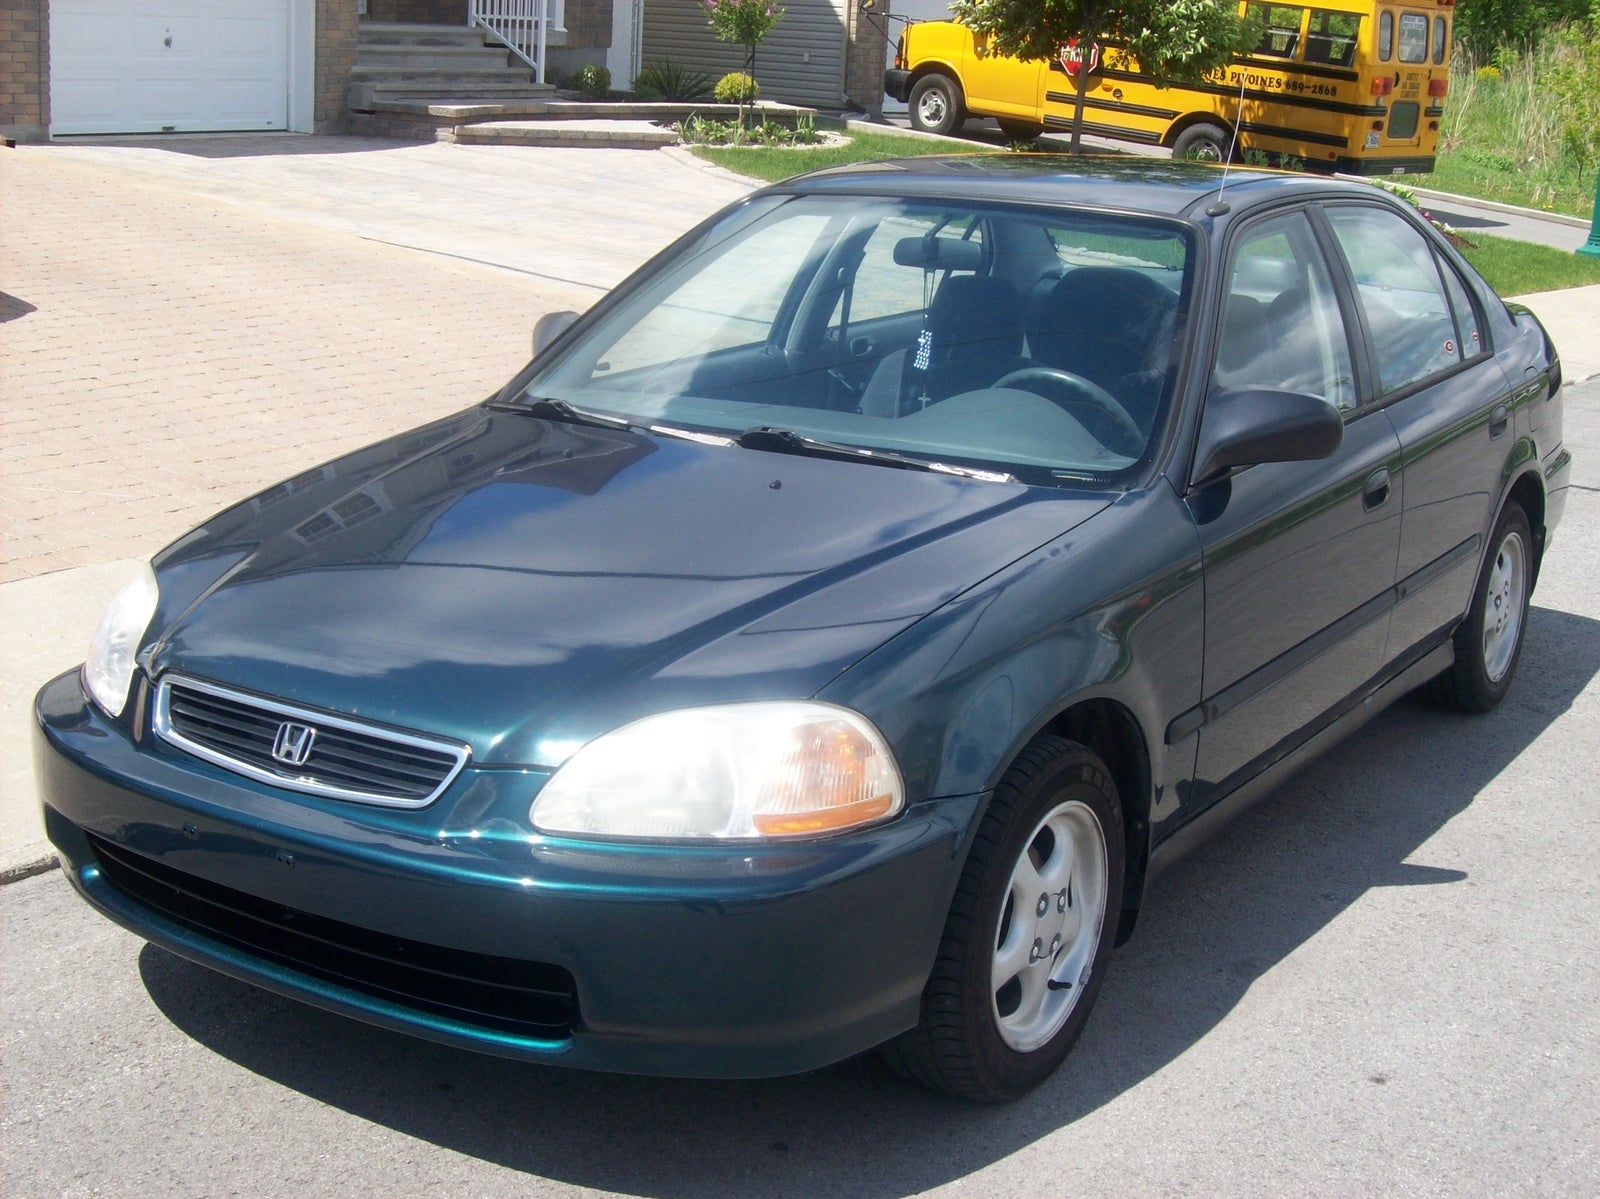 1998 Honda Civic LX related infomation,specifications